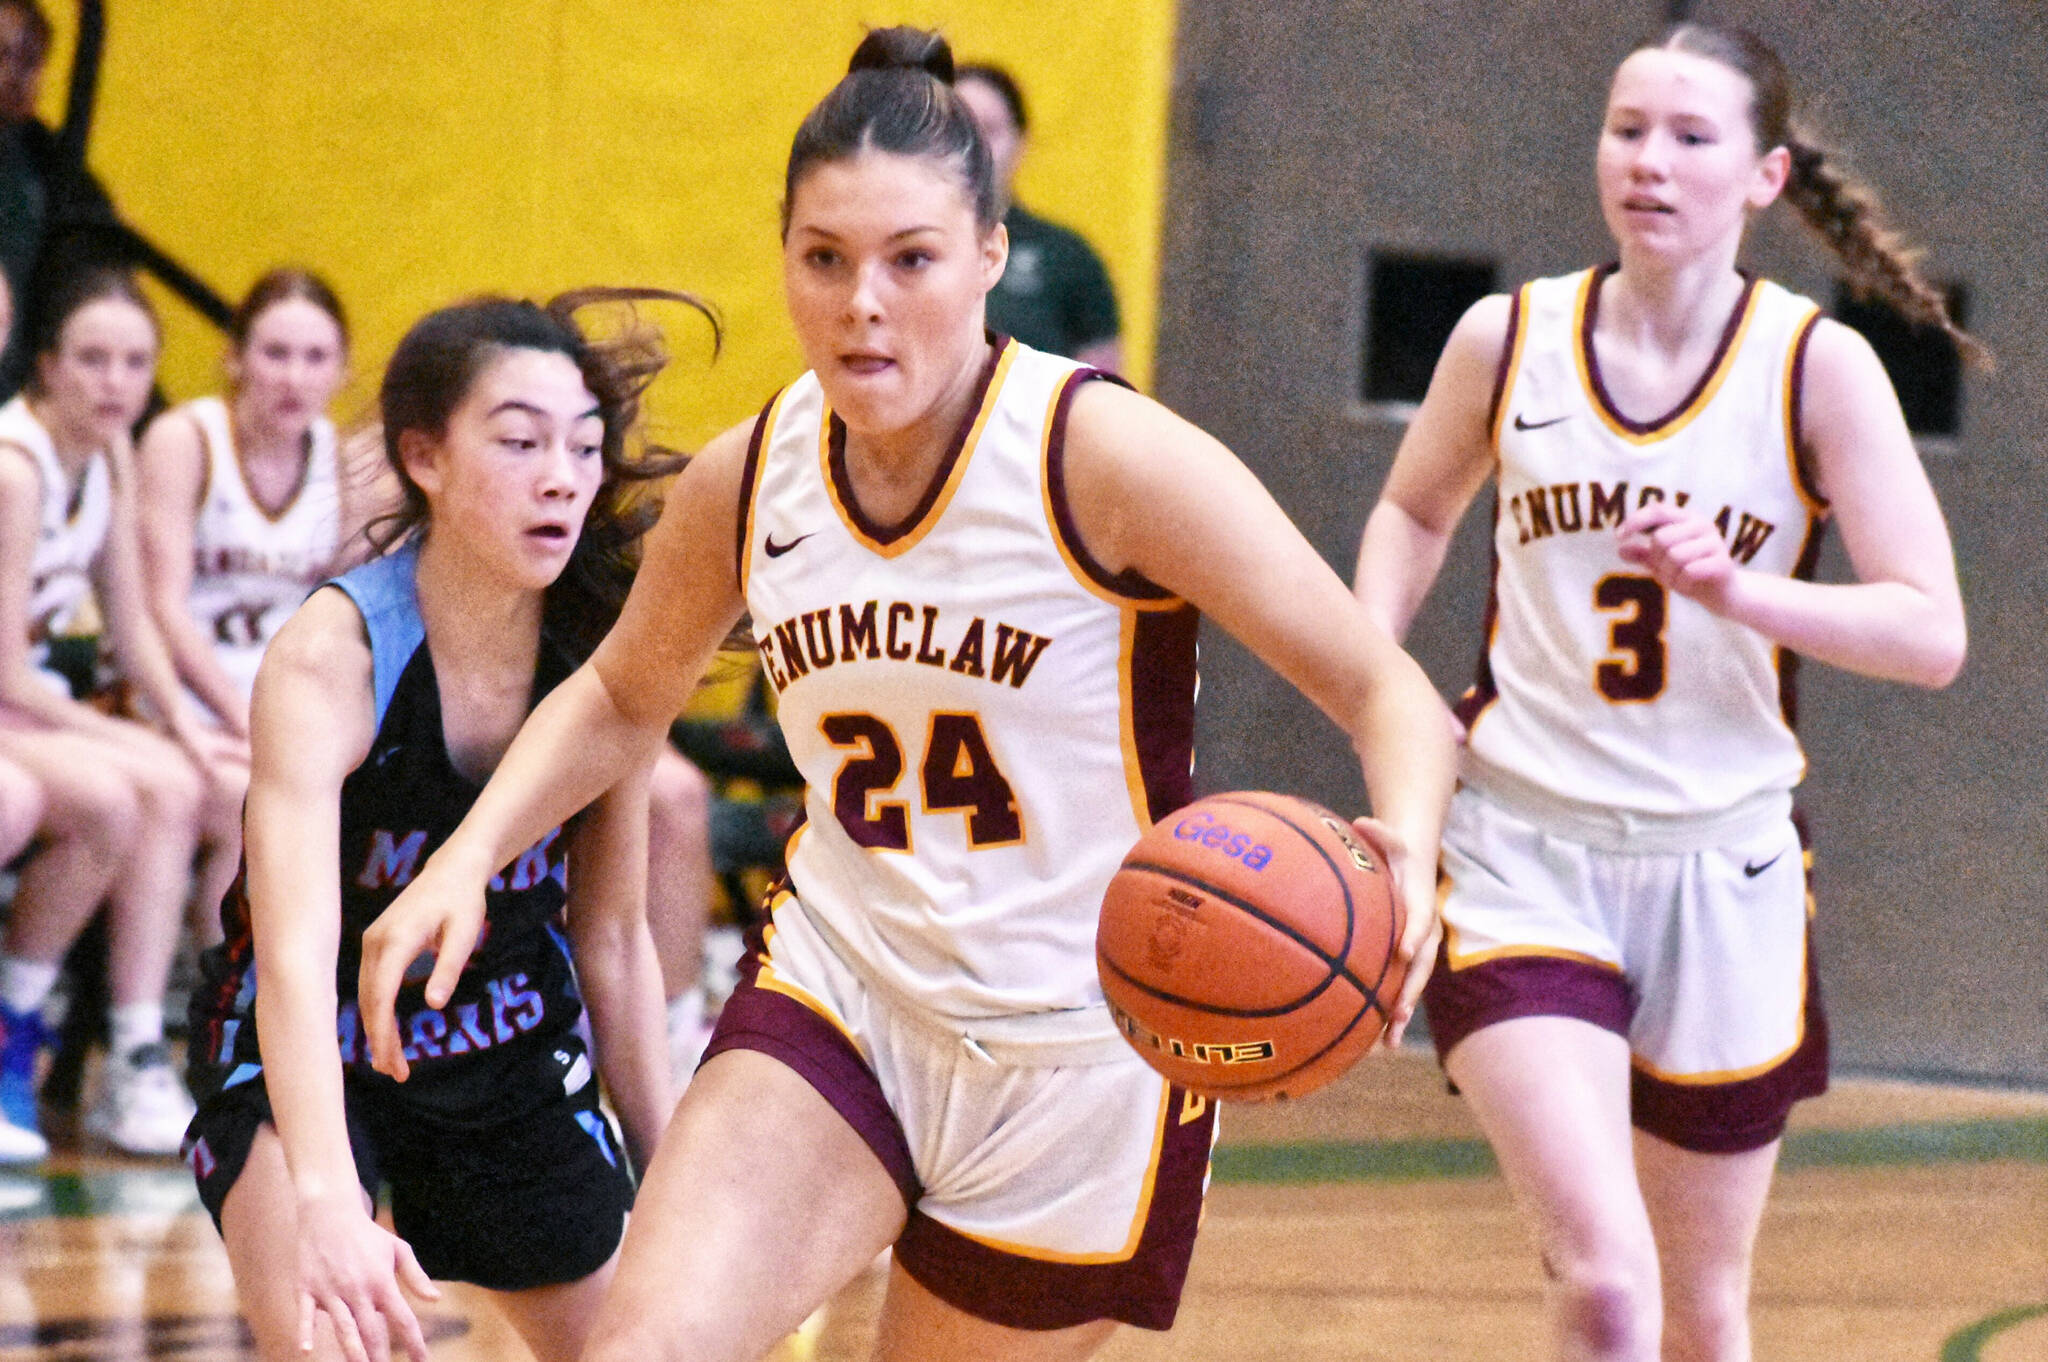 The Enumclaw High girls’ basketball team defeated Mark Morris Saturday afternoon, earning a berth in the state’s Round of 12 and a trip to the Yakima Valley SunDome. In this photo Emma Holt (24) pushes the ball across midcourt while looking for open teammates. Photo by Kevin Hanson